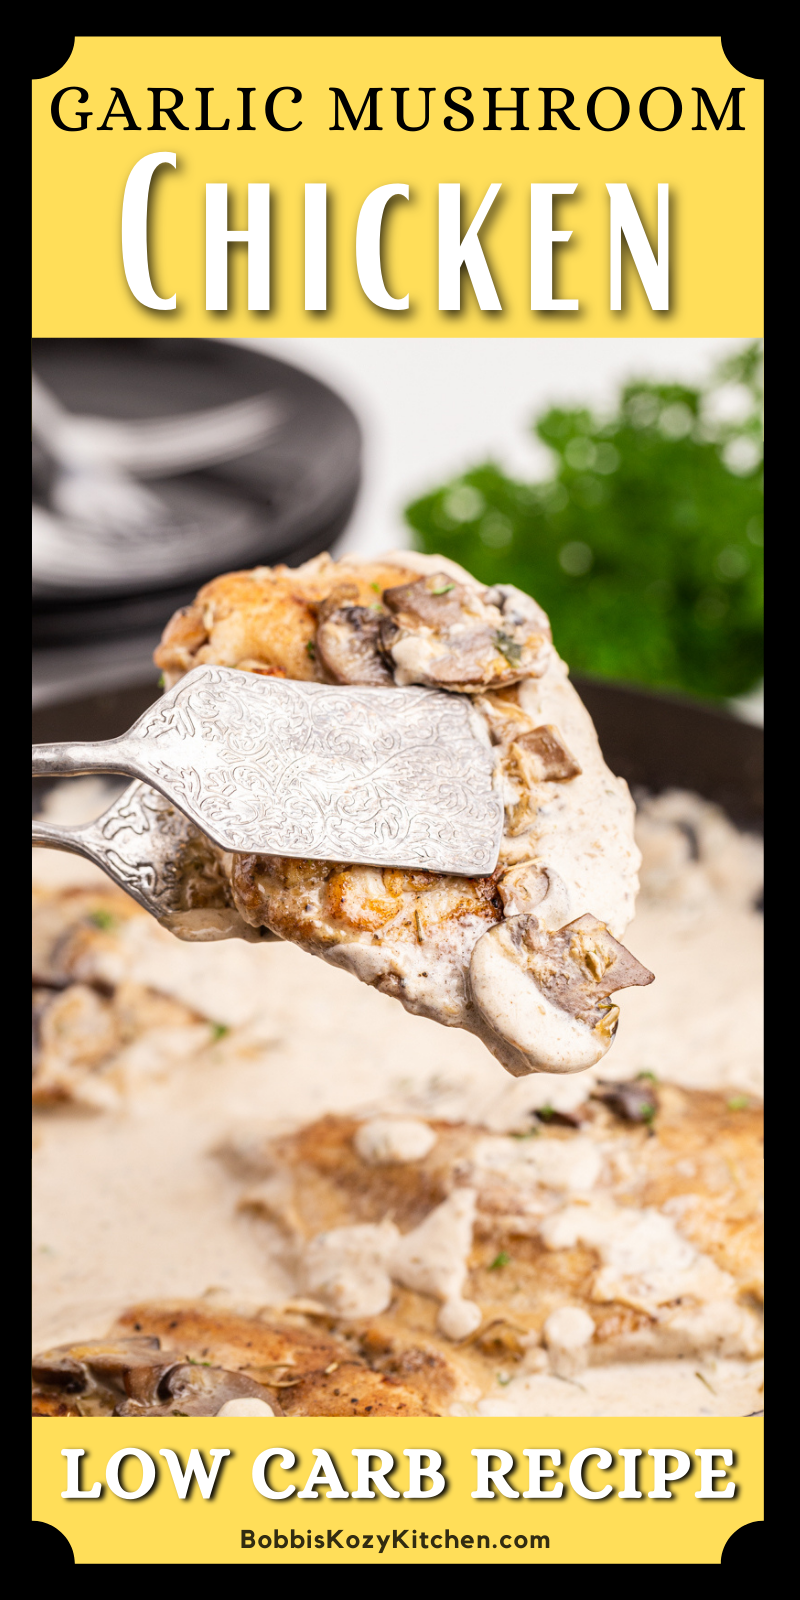 Chicken with Mushroom Garlic Sauce - This recipe for Chicken with Garlic Mushroom Sauce gives you juicy chicken breasts smothered in a glorious garlic mushroom sauce. It is low-carb comfort food that could be on your table in about 30 minutes! #keto #lowcarb #glutenfree #easy #skillet #recipe #chicken #mushroom #garlic #creamy #sauce